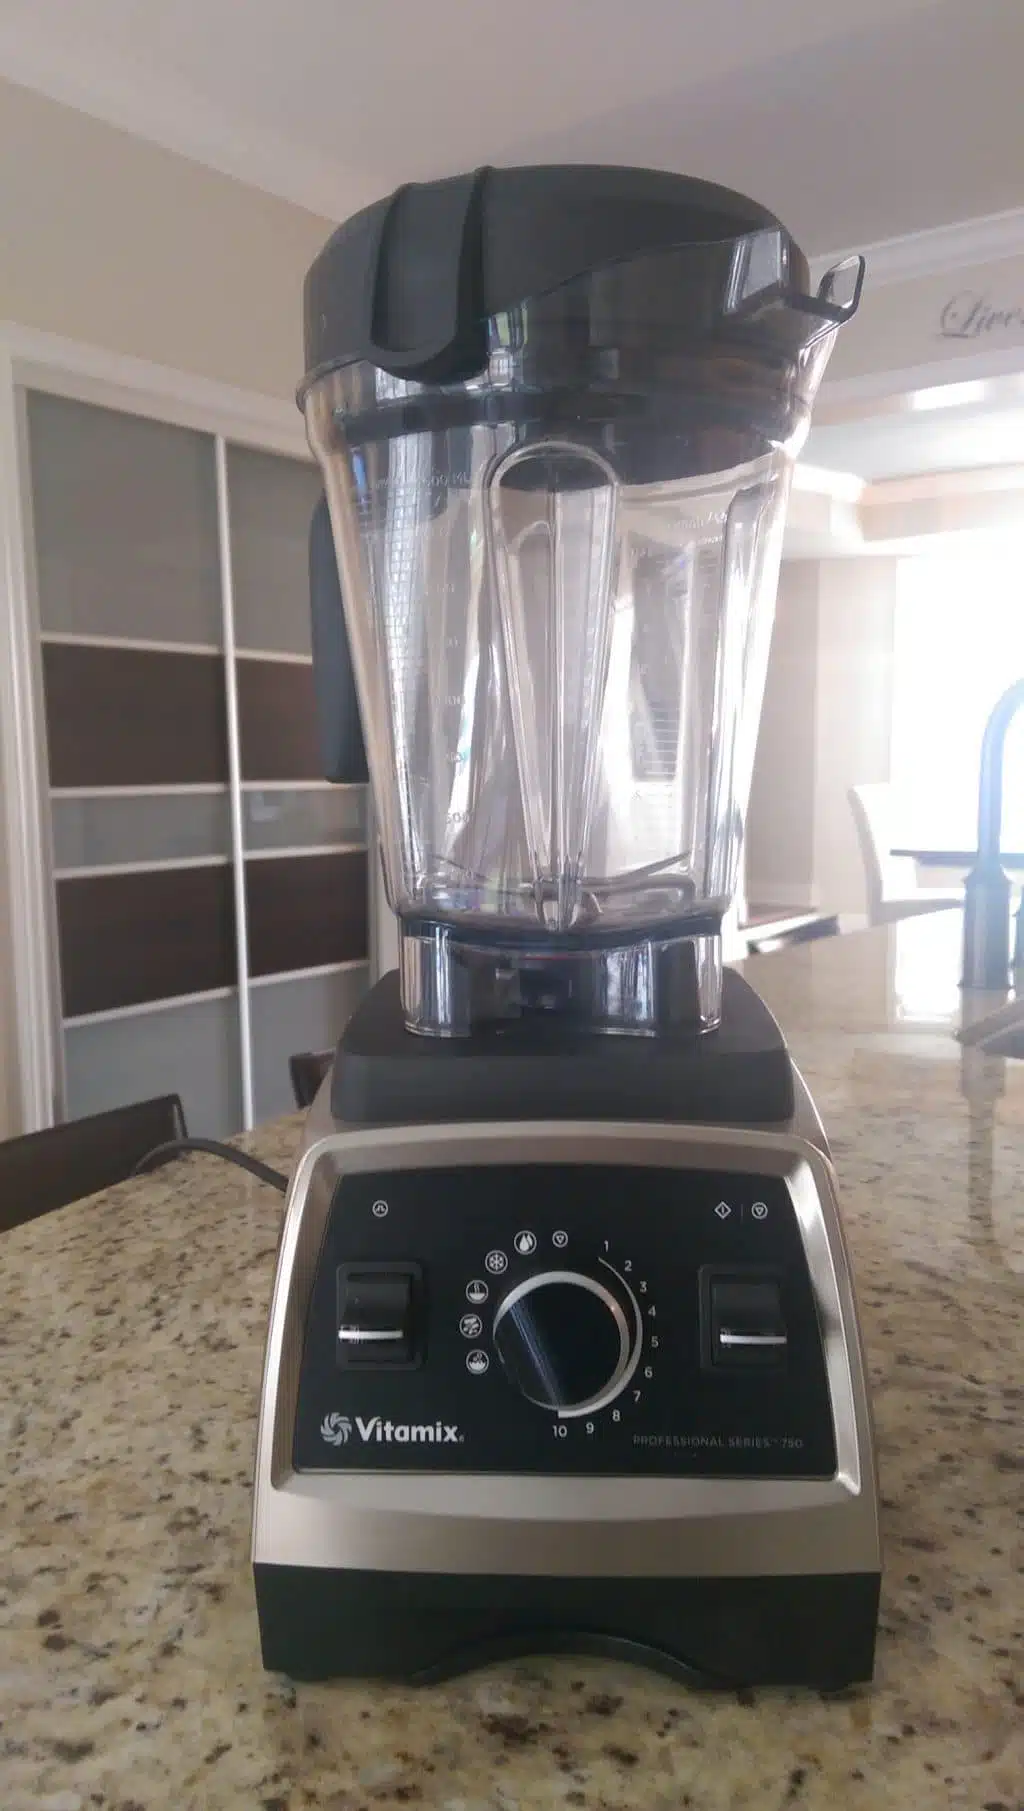 Clean, Empty Vitamix Professional Series 750 blender on counter